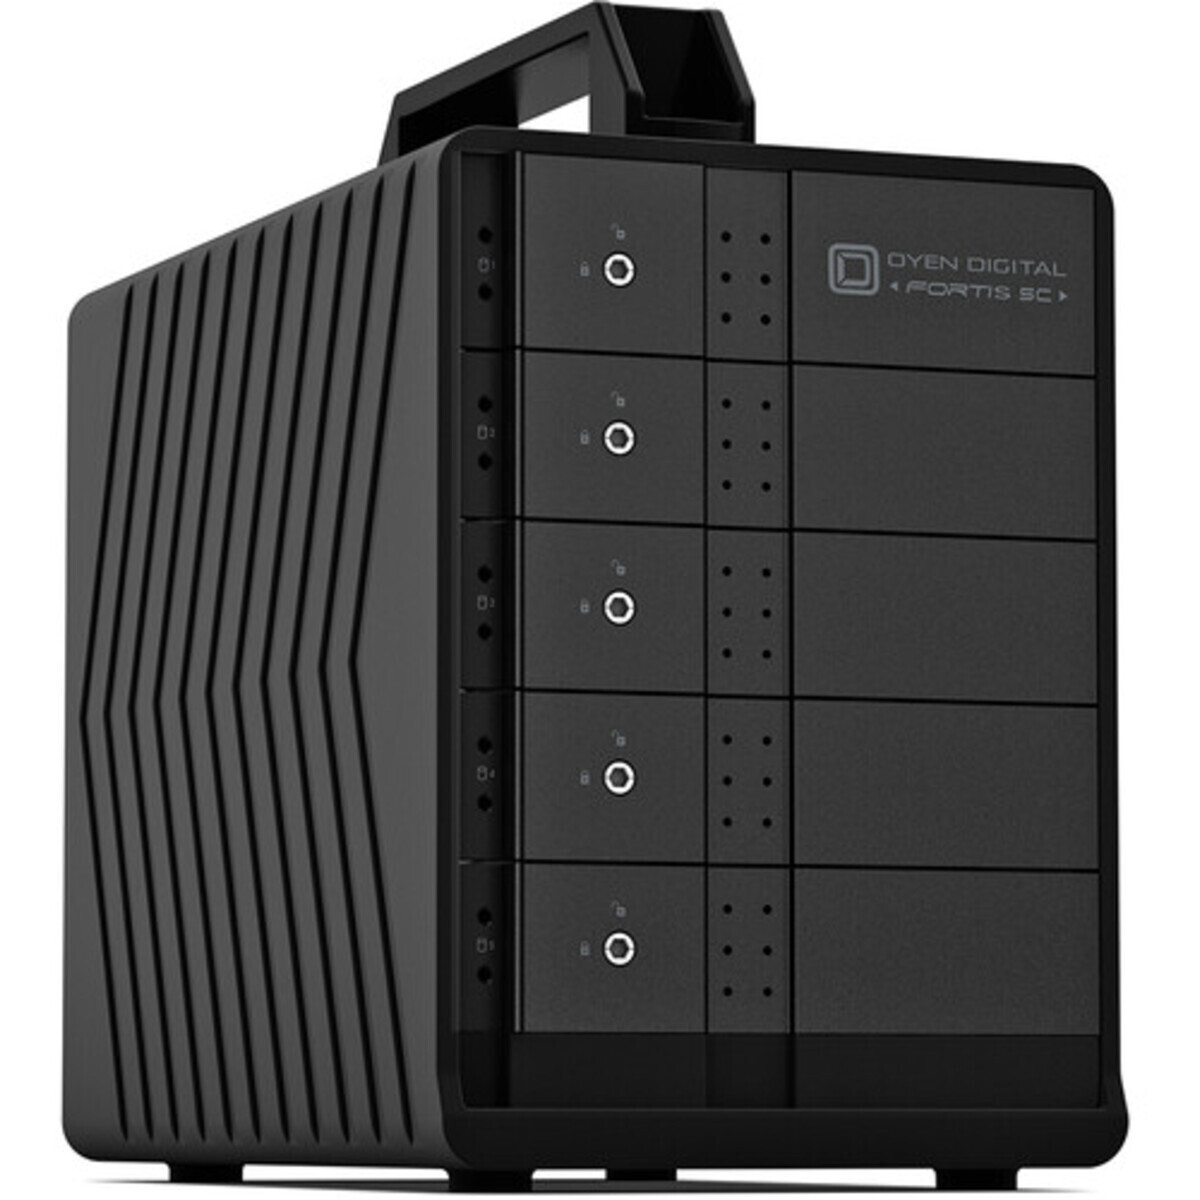 OYEN Fortis 5C 110tb 5-Bay Desktop Multimedia / Power User / Business DAS - Direct Attached Storage Device 5x22tb Western Digital Ultrastar HC580 WUH722422ALE6L4 3.5 7200rpm SATA 6Gb/s HDD ENTERPRISE Class Drives Installed - Burn-In Tested Fortis 5C